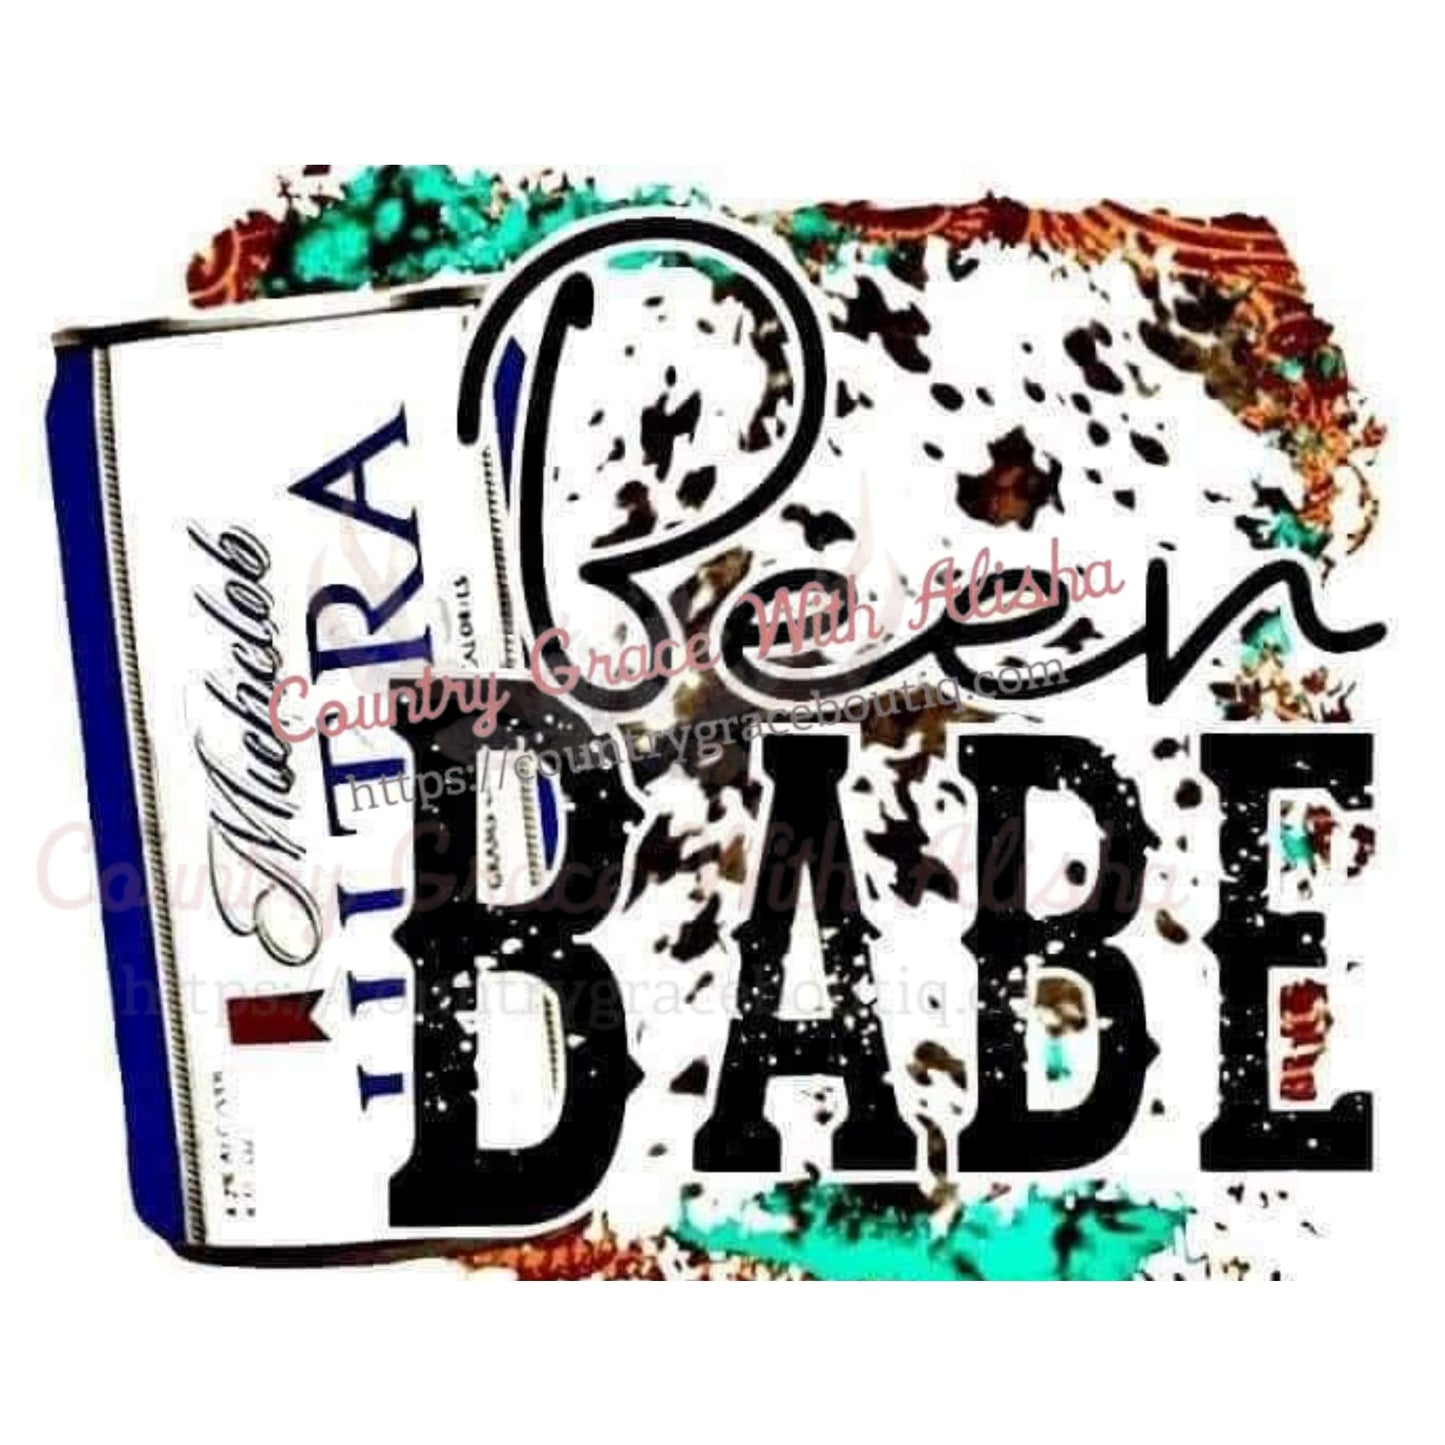 Beer Babe Sublimation Transfer - Sub $1.50 Country Grace 